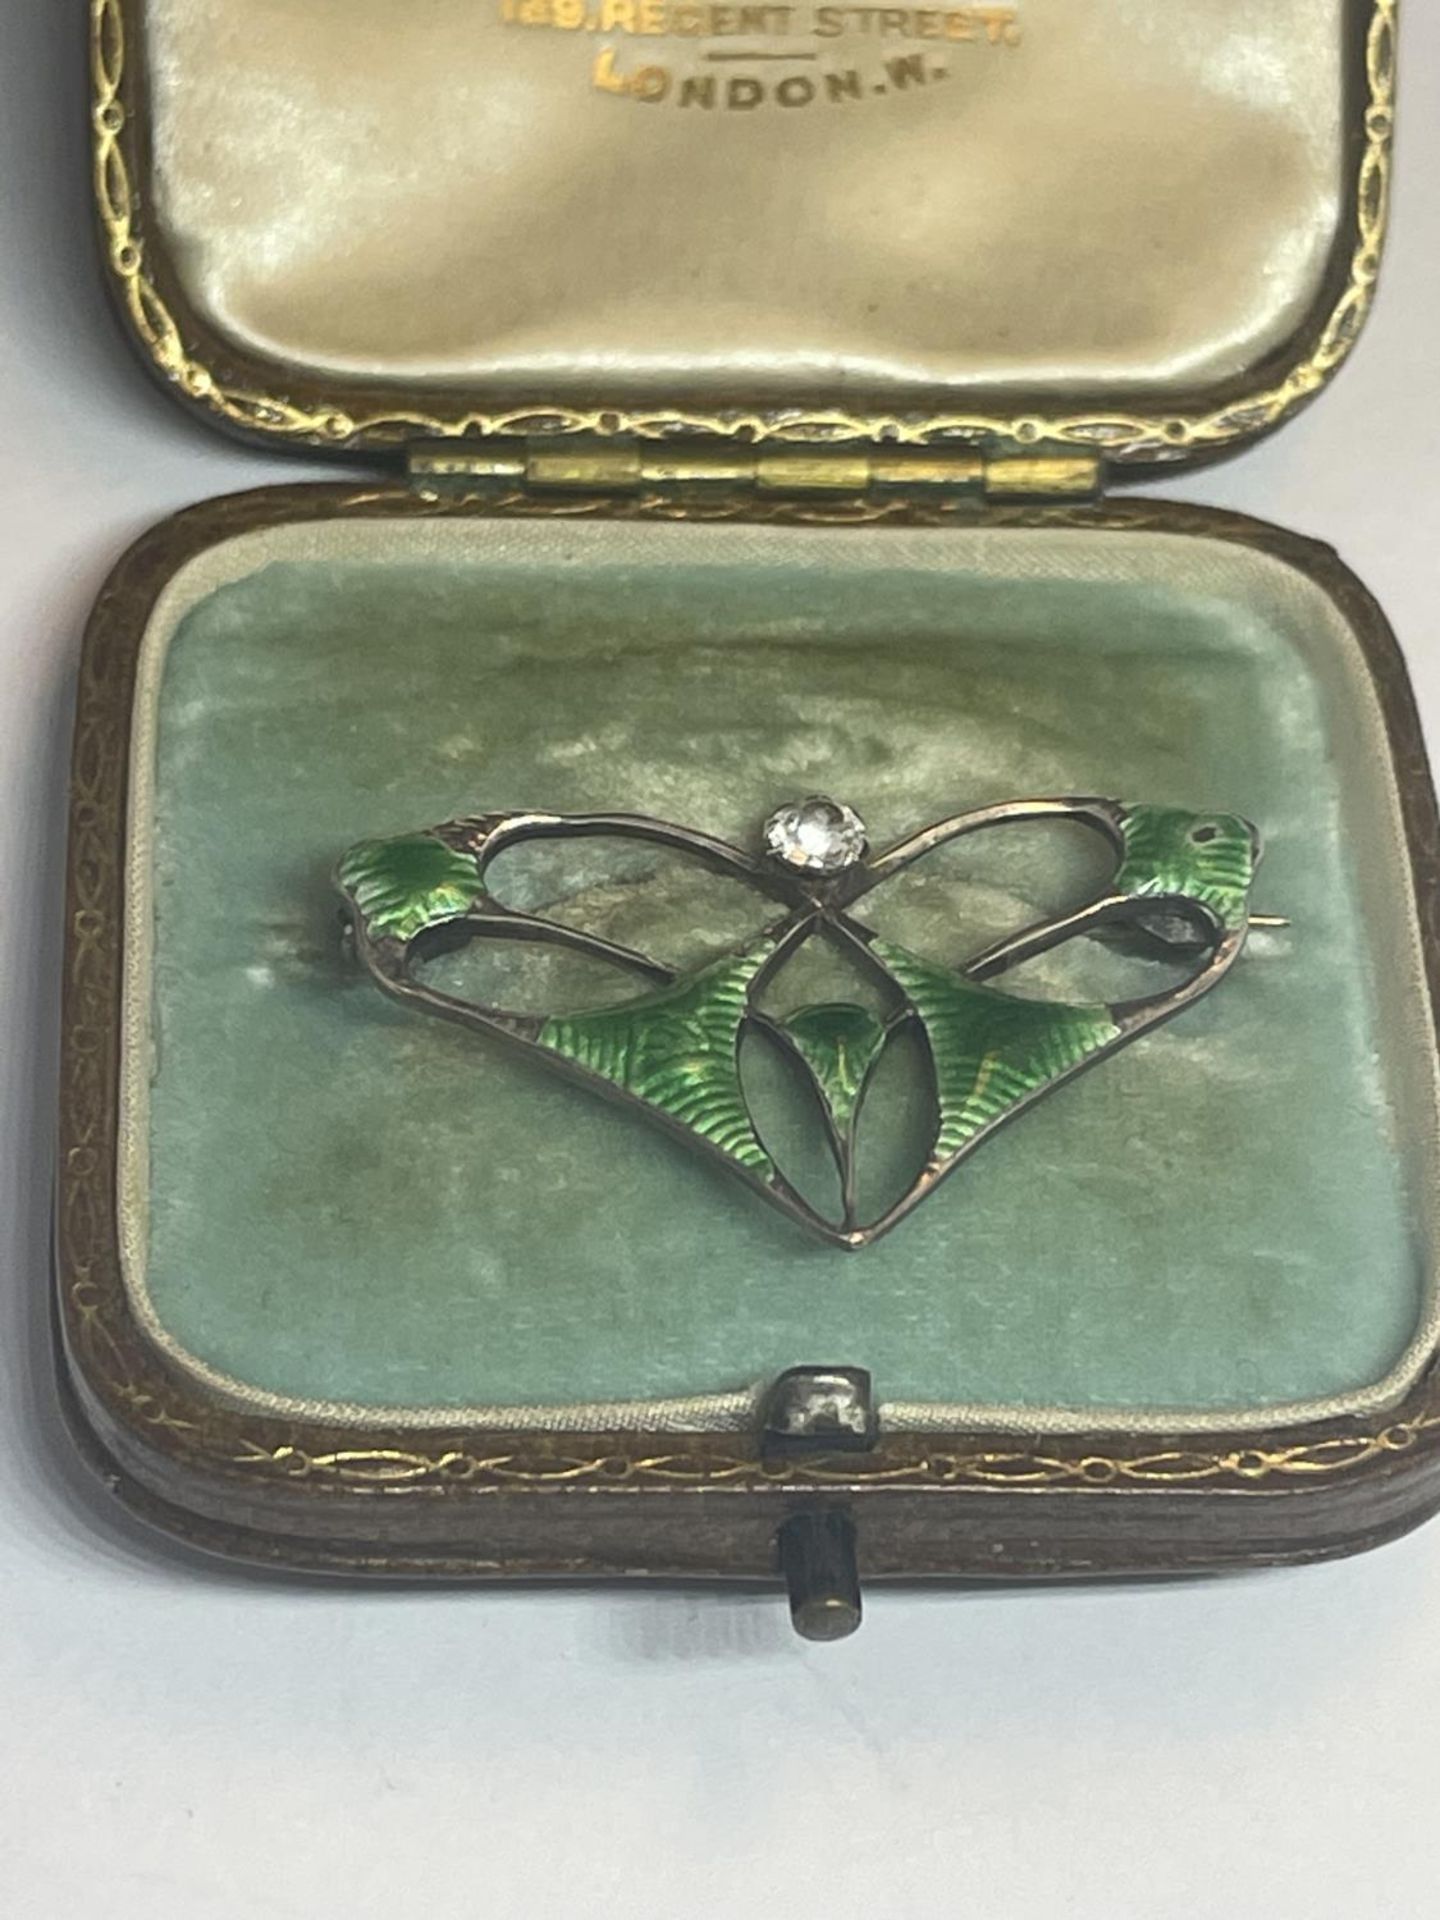 A CHARLES HORNER CHESTER SILVER AND ENAMELLED BROOCH IN A PRESENTATION BOX - Bild 3 aus 3